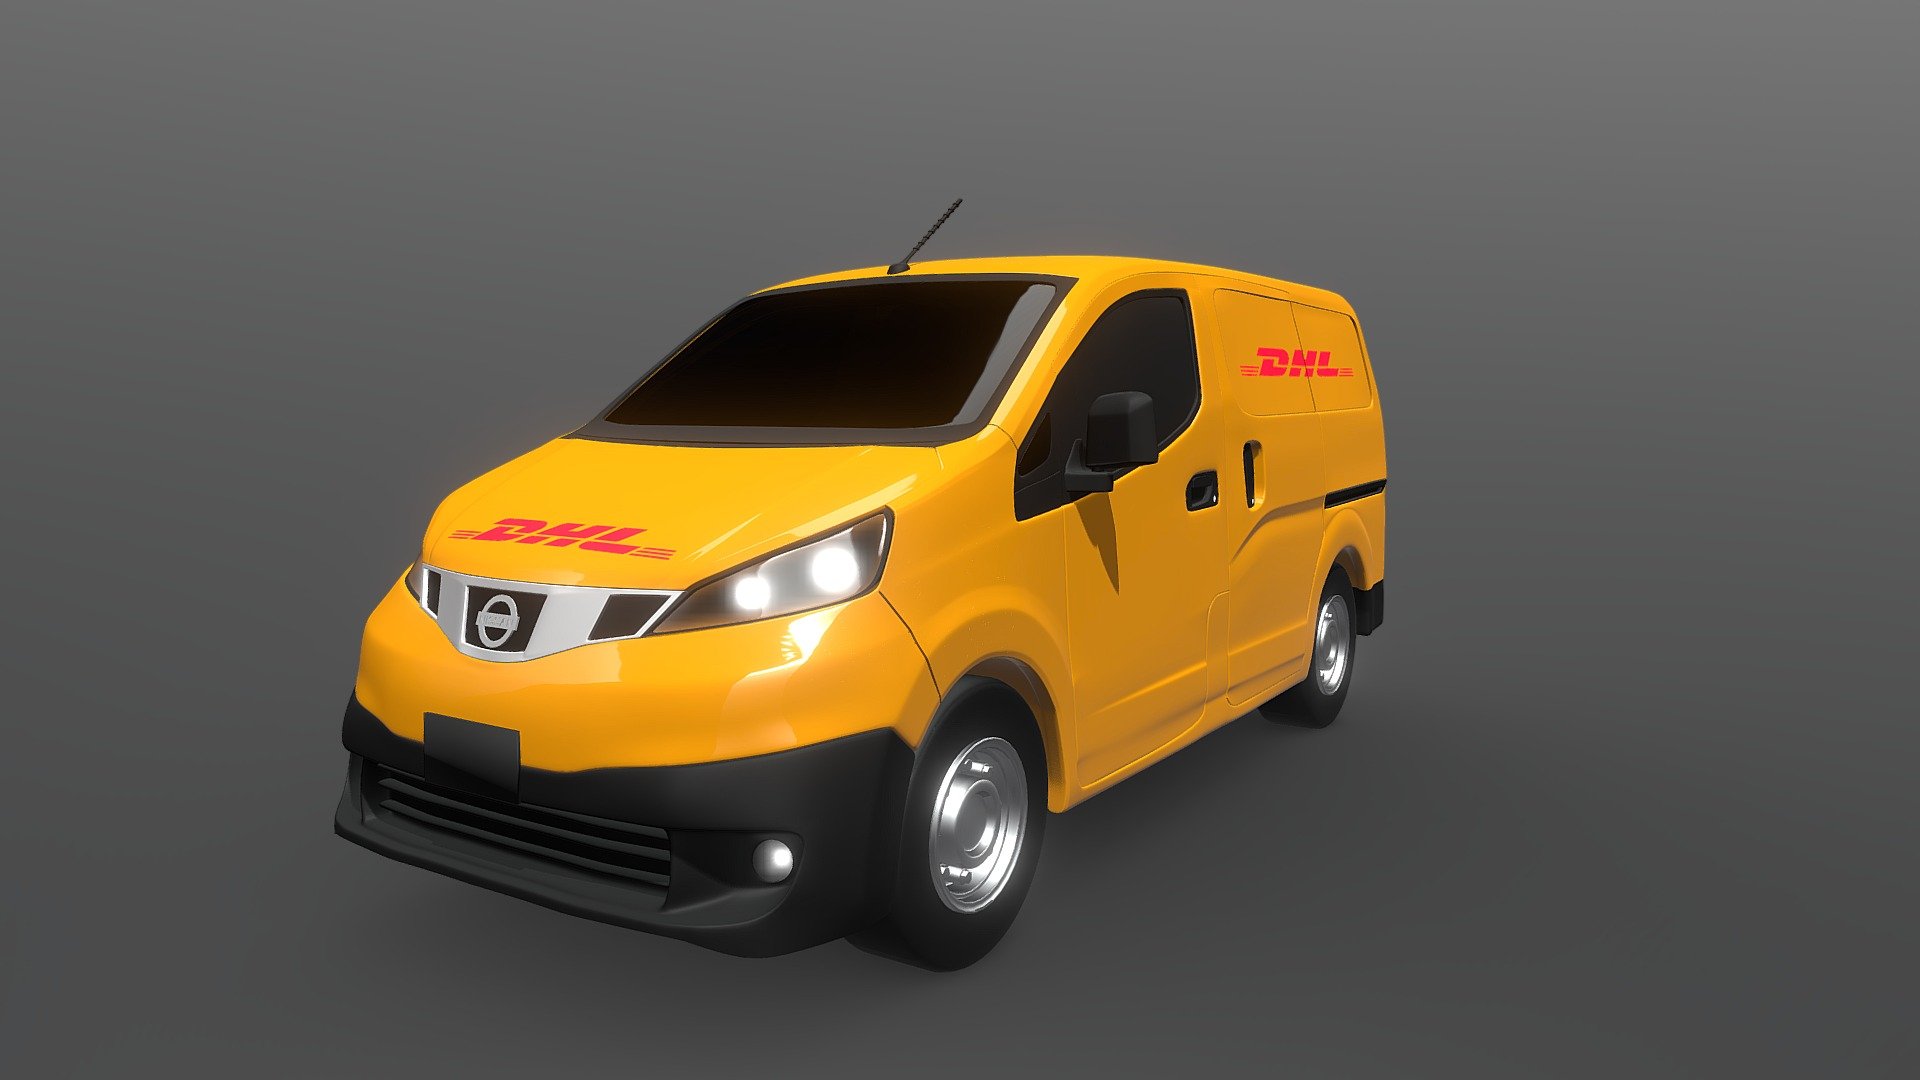 Dhl delivery van 3D model.
All made in Blender. Hope you like it! Its free to use and download 3d model